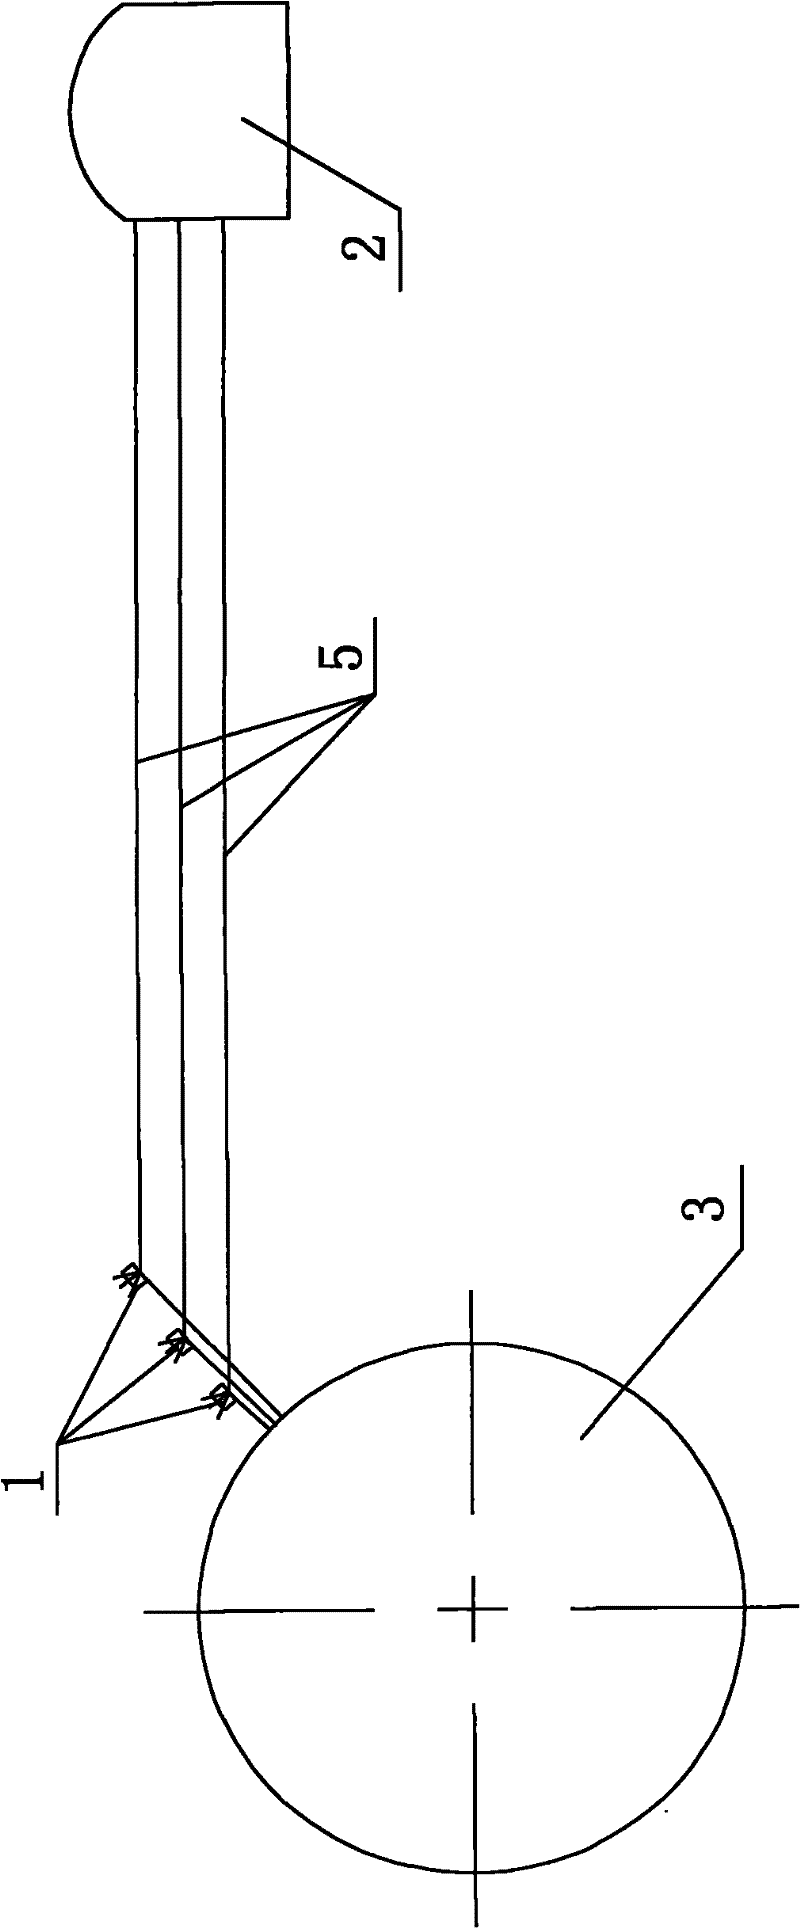 Measurement method for stress change of rocks during TBM tunneling